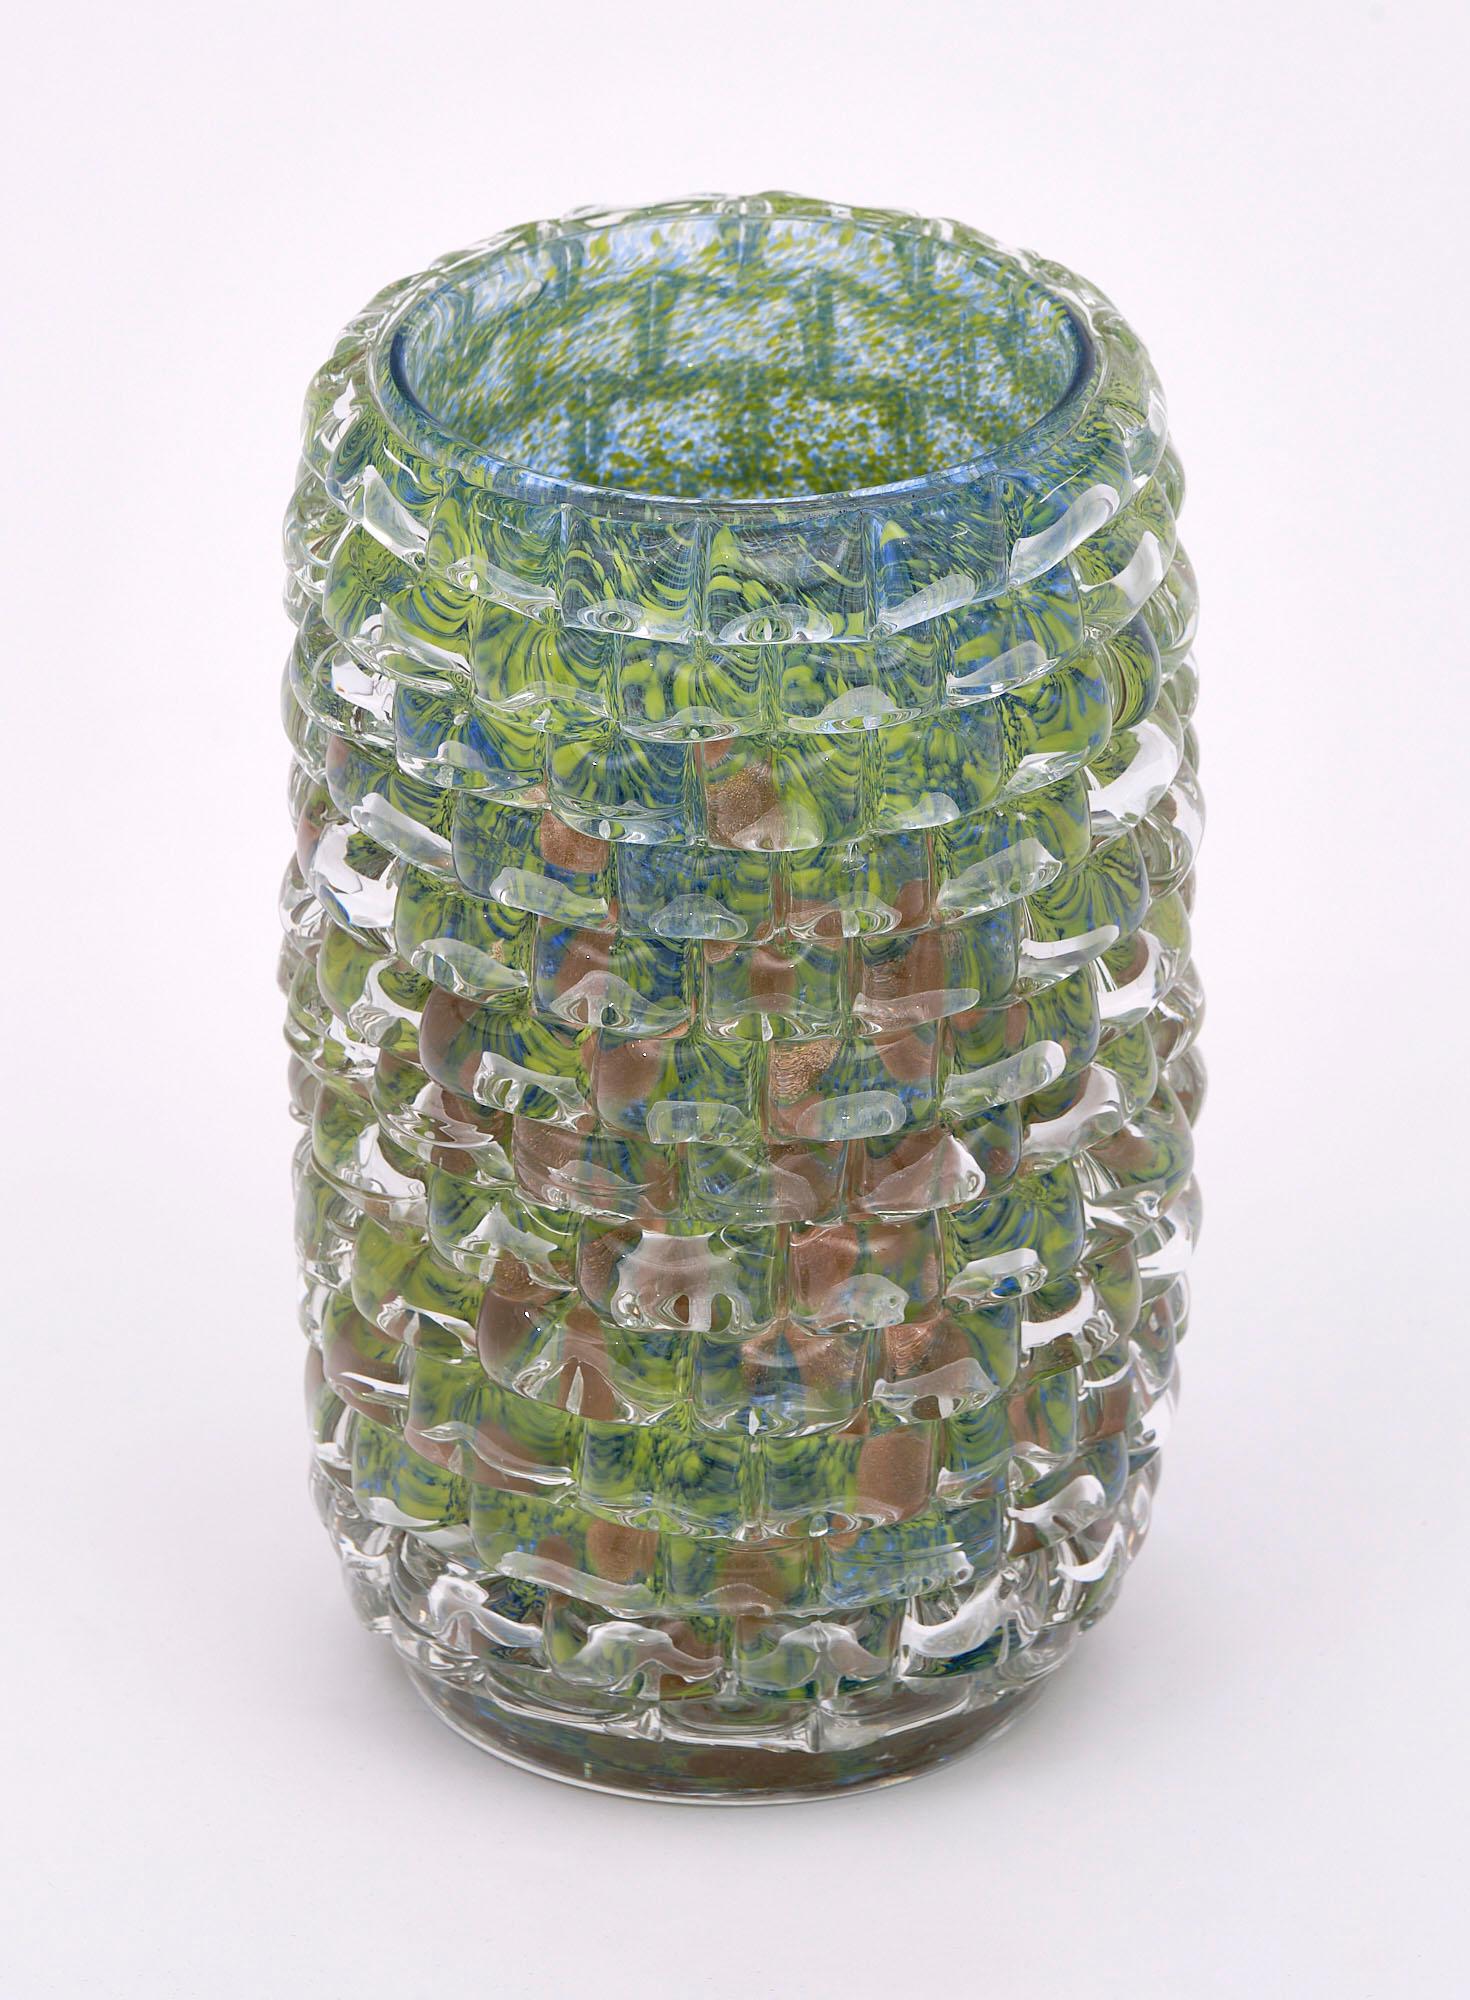 Vase from the island of Murano made of hand-blown glass in the “belle soffiate” technique.